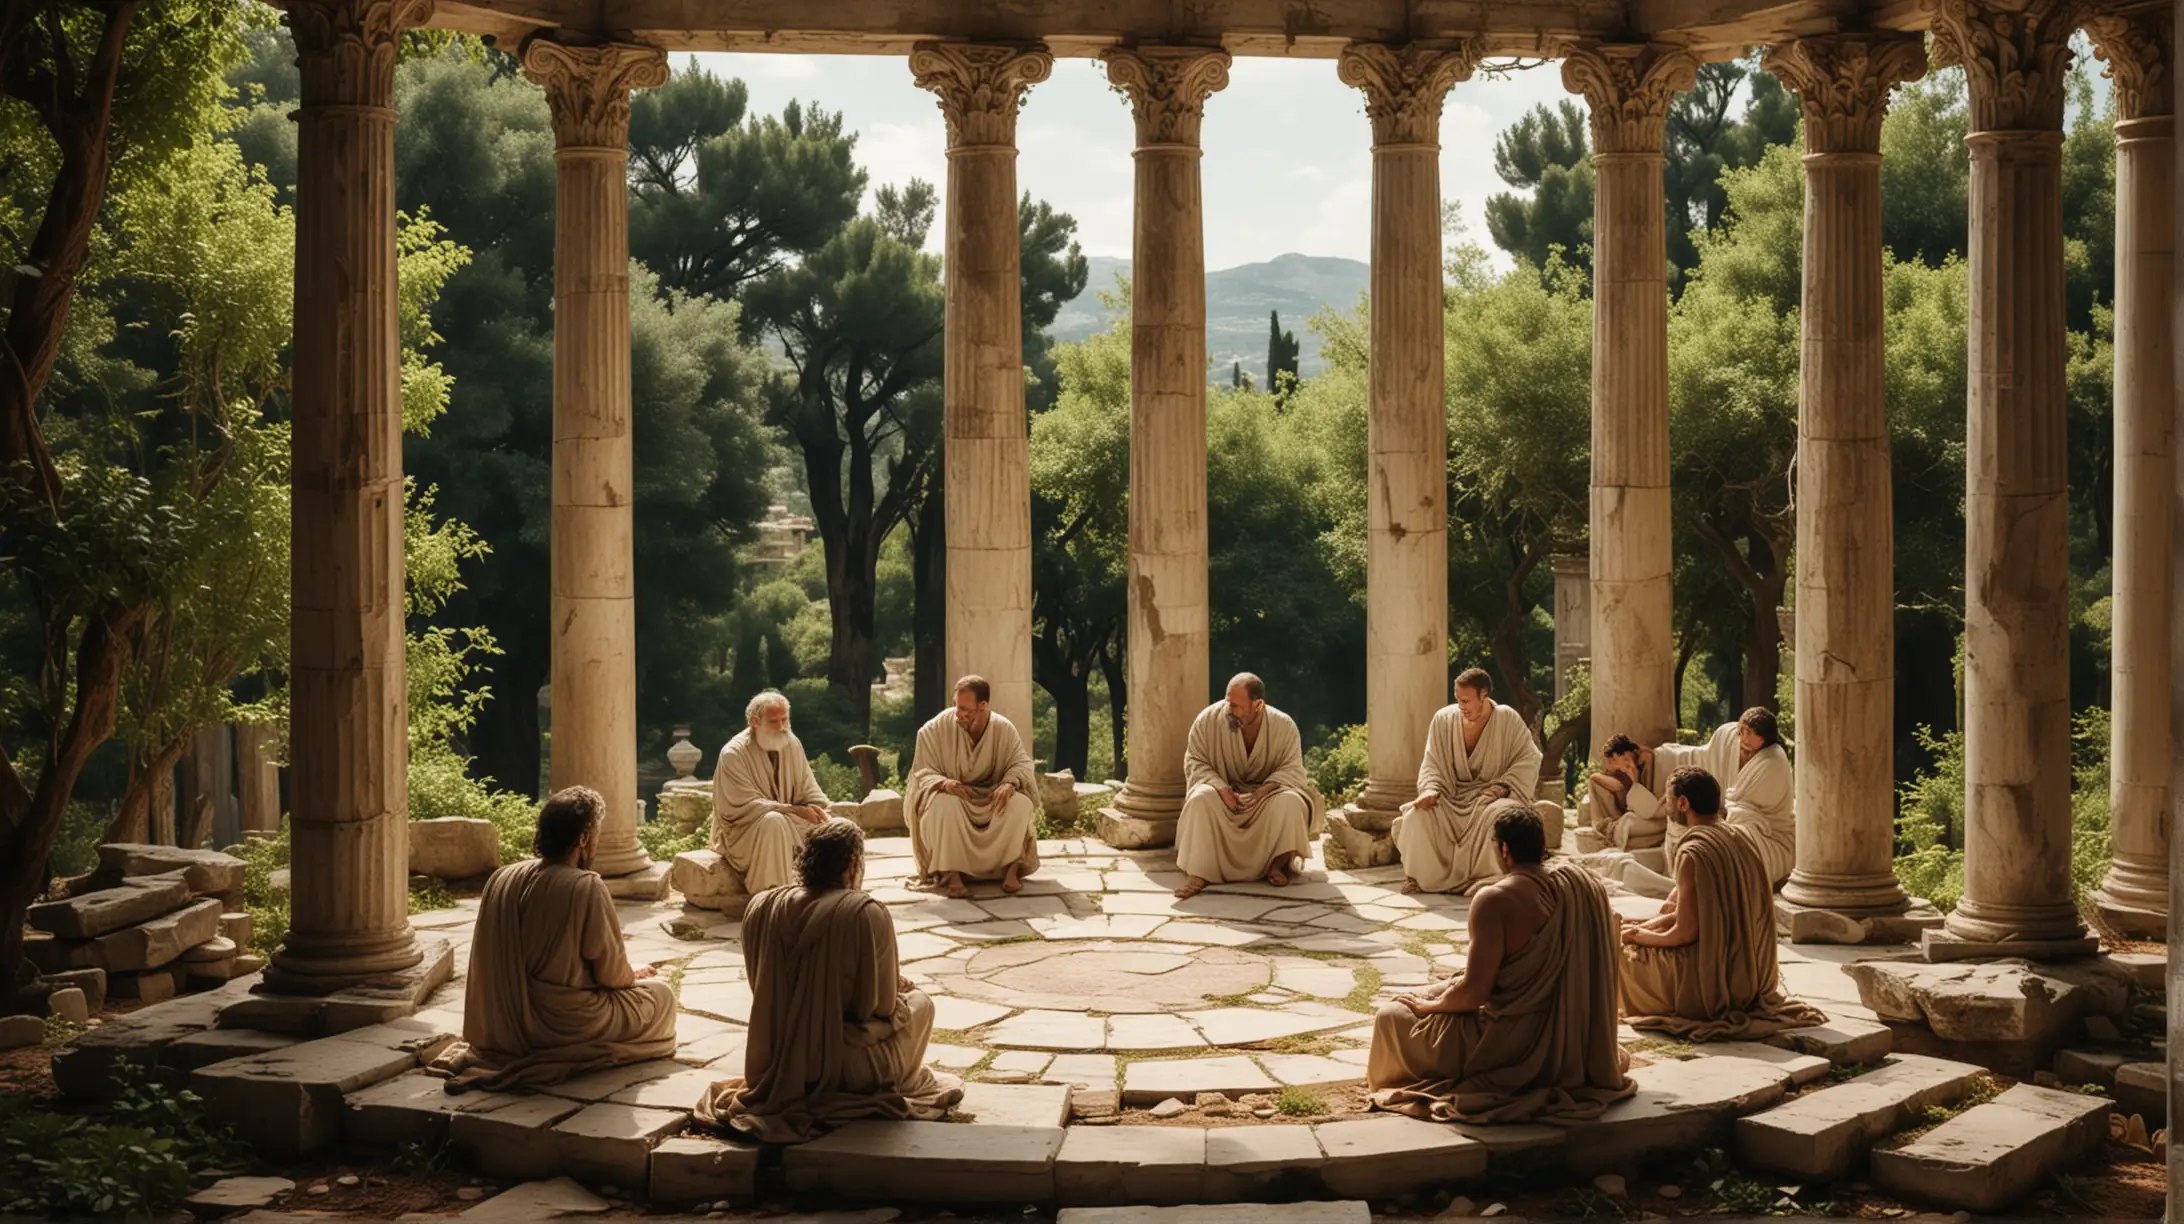 Serene Gathering of Stoic Philosophers Amidst Ancient Greek Architecture and Greenery